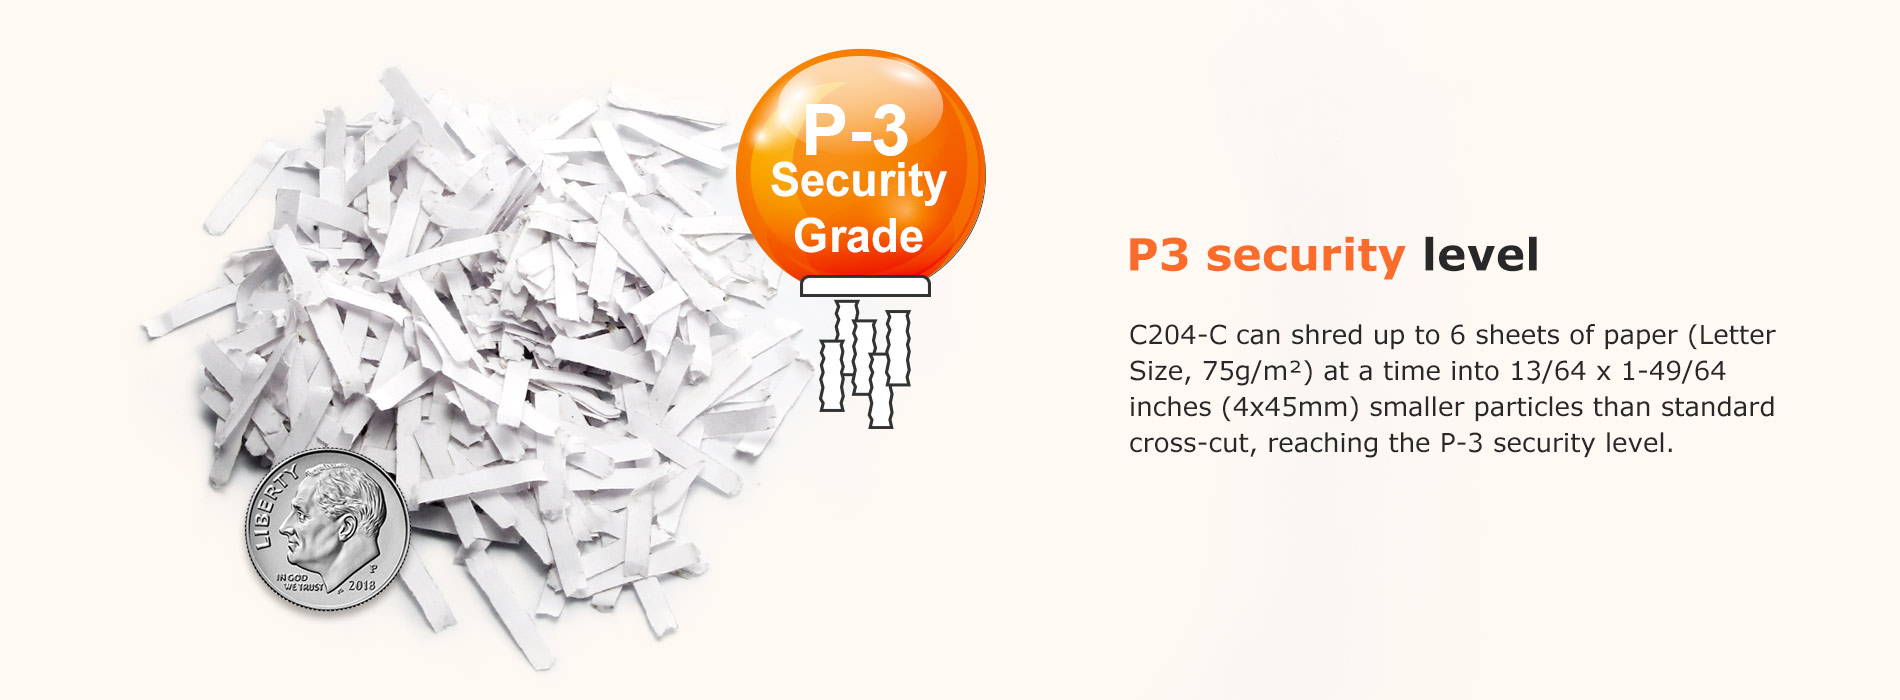 P3 security level C204-C can shred up to 6 sheets of paper (Letter Size, 75g/m²) at a time into 13/64 x 1-49/64 inches (4x45mm) smaller particles than standard cross-cut, reaching the P-3 security level.